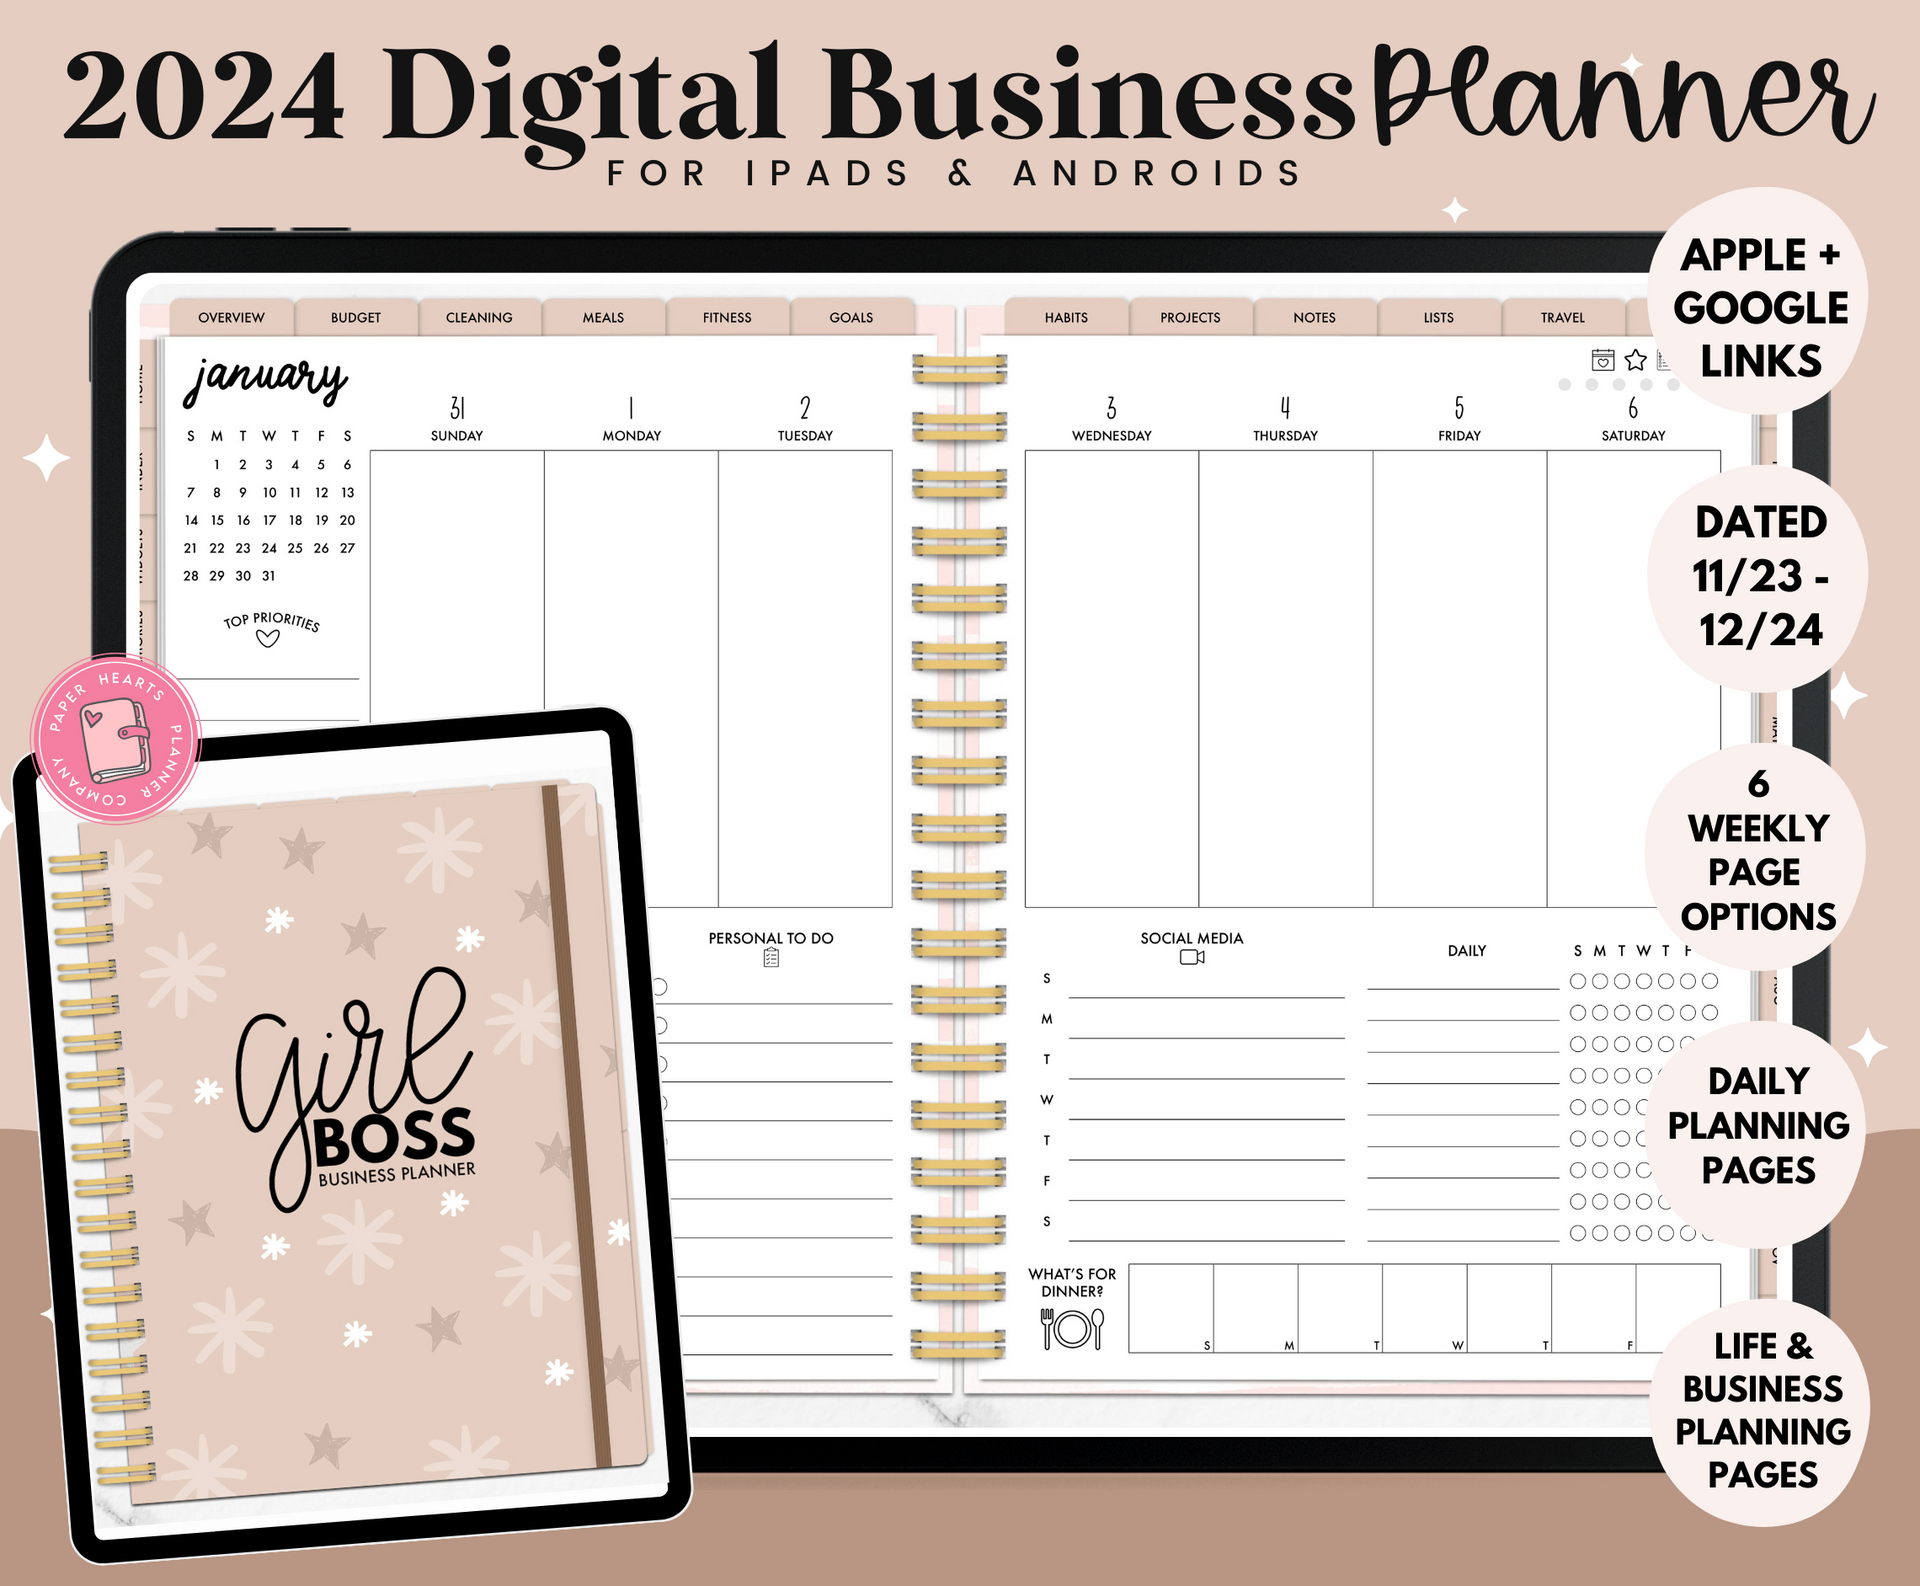 Digital Budget Planner - 2024 Dated. – Papers by Jessica Ann